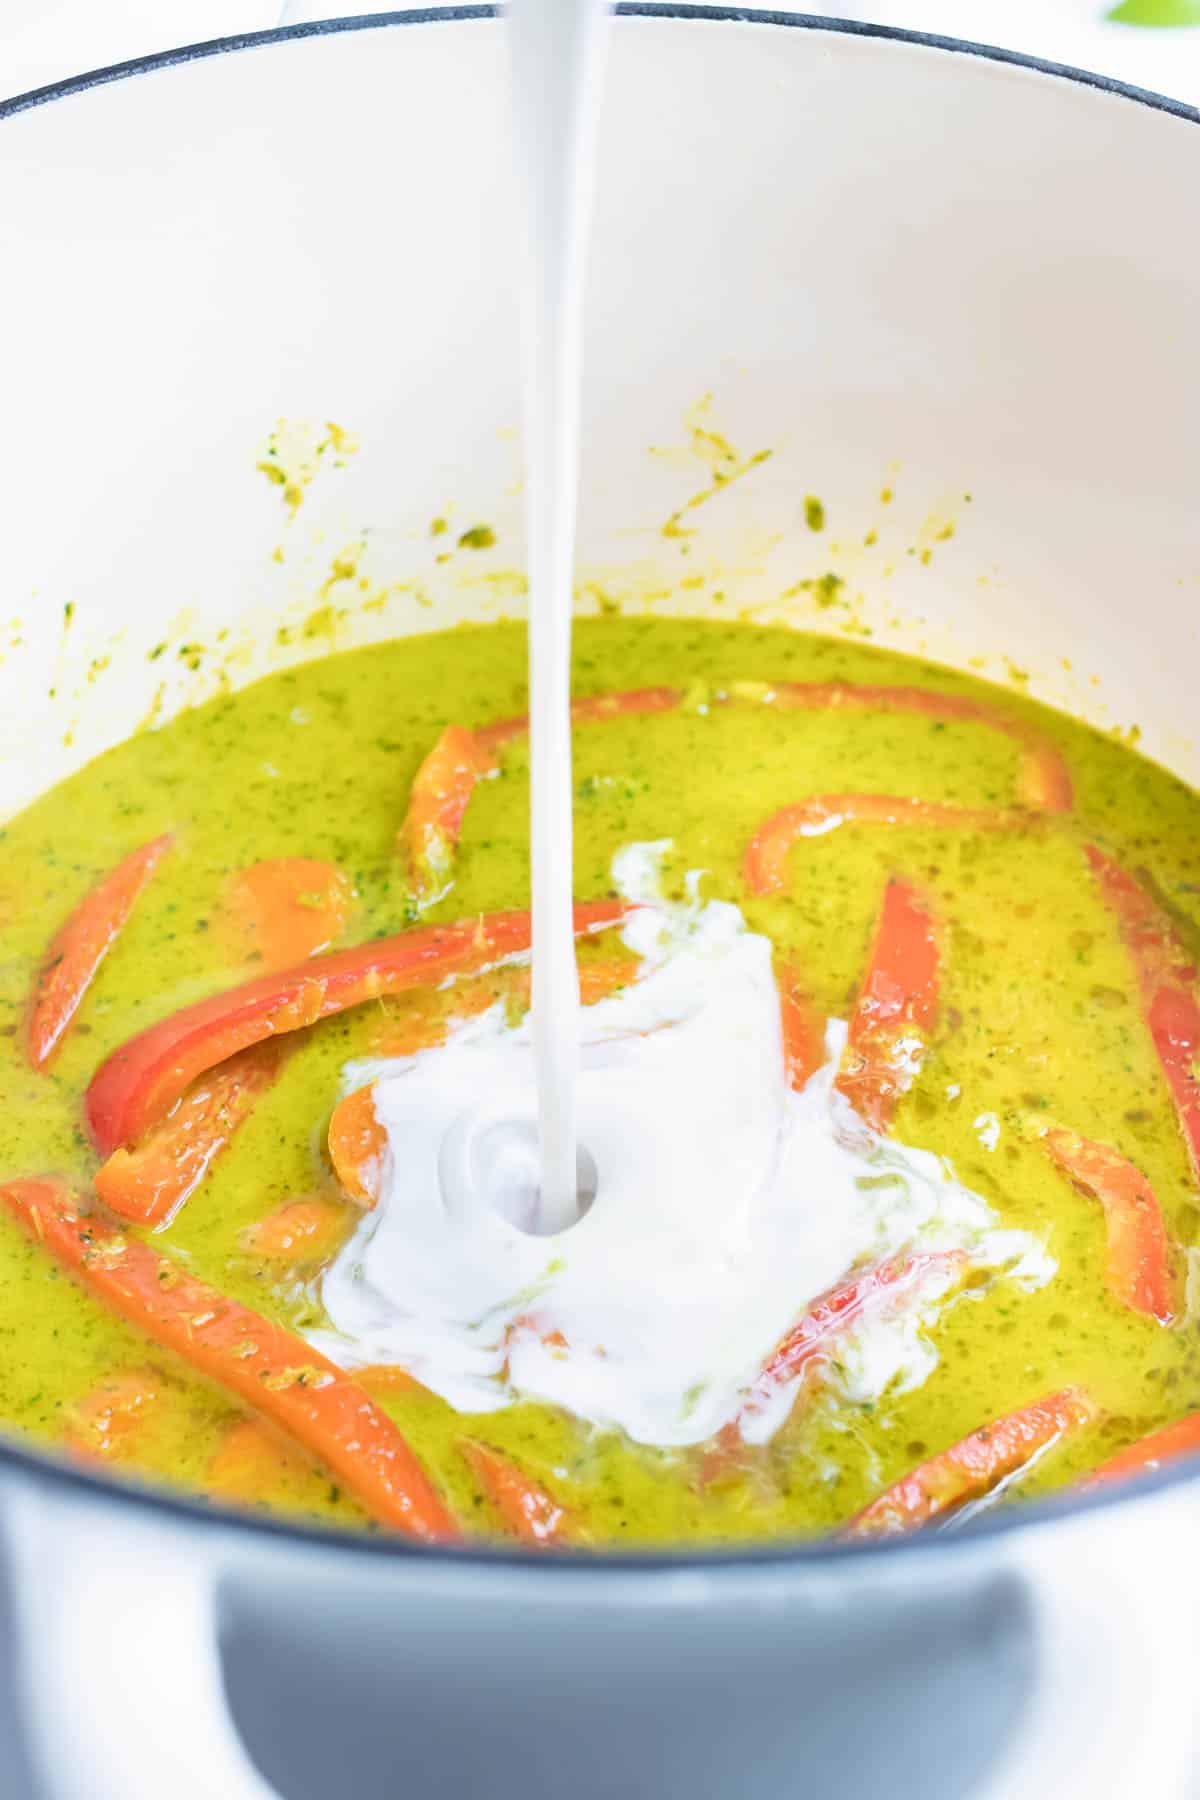 Coconut milk, curry paste, chicken broth, and bell peppers are added to the dutch oven or pot.